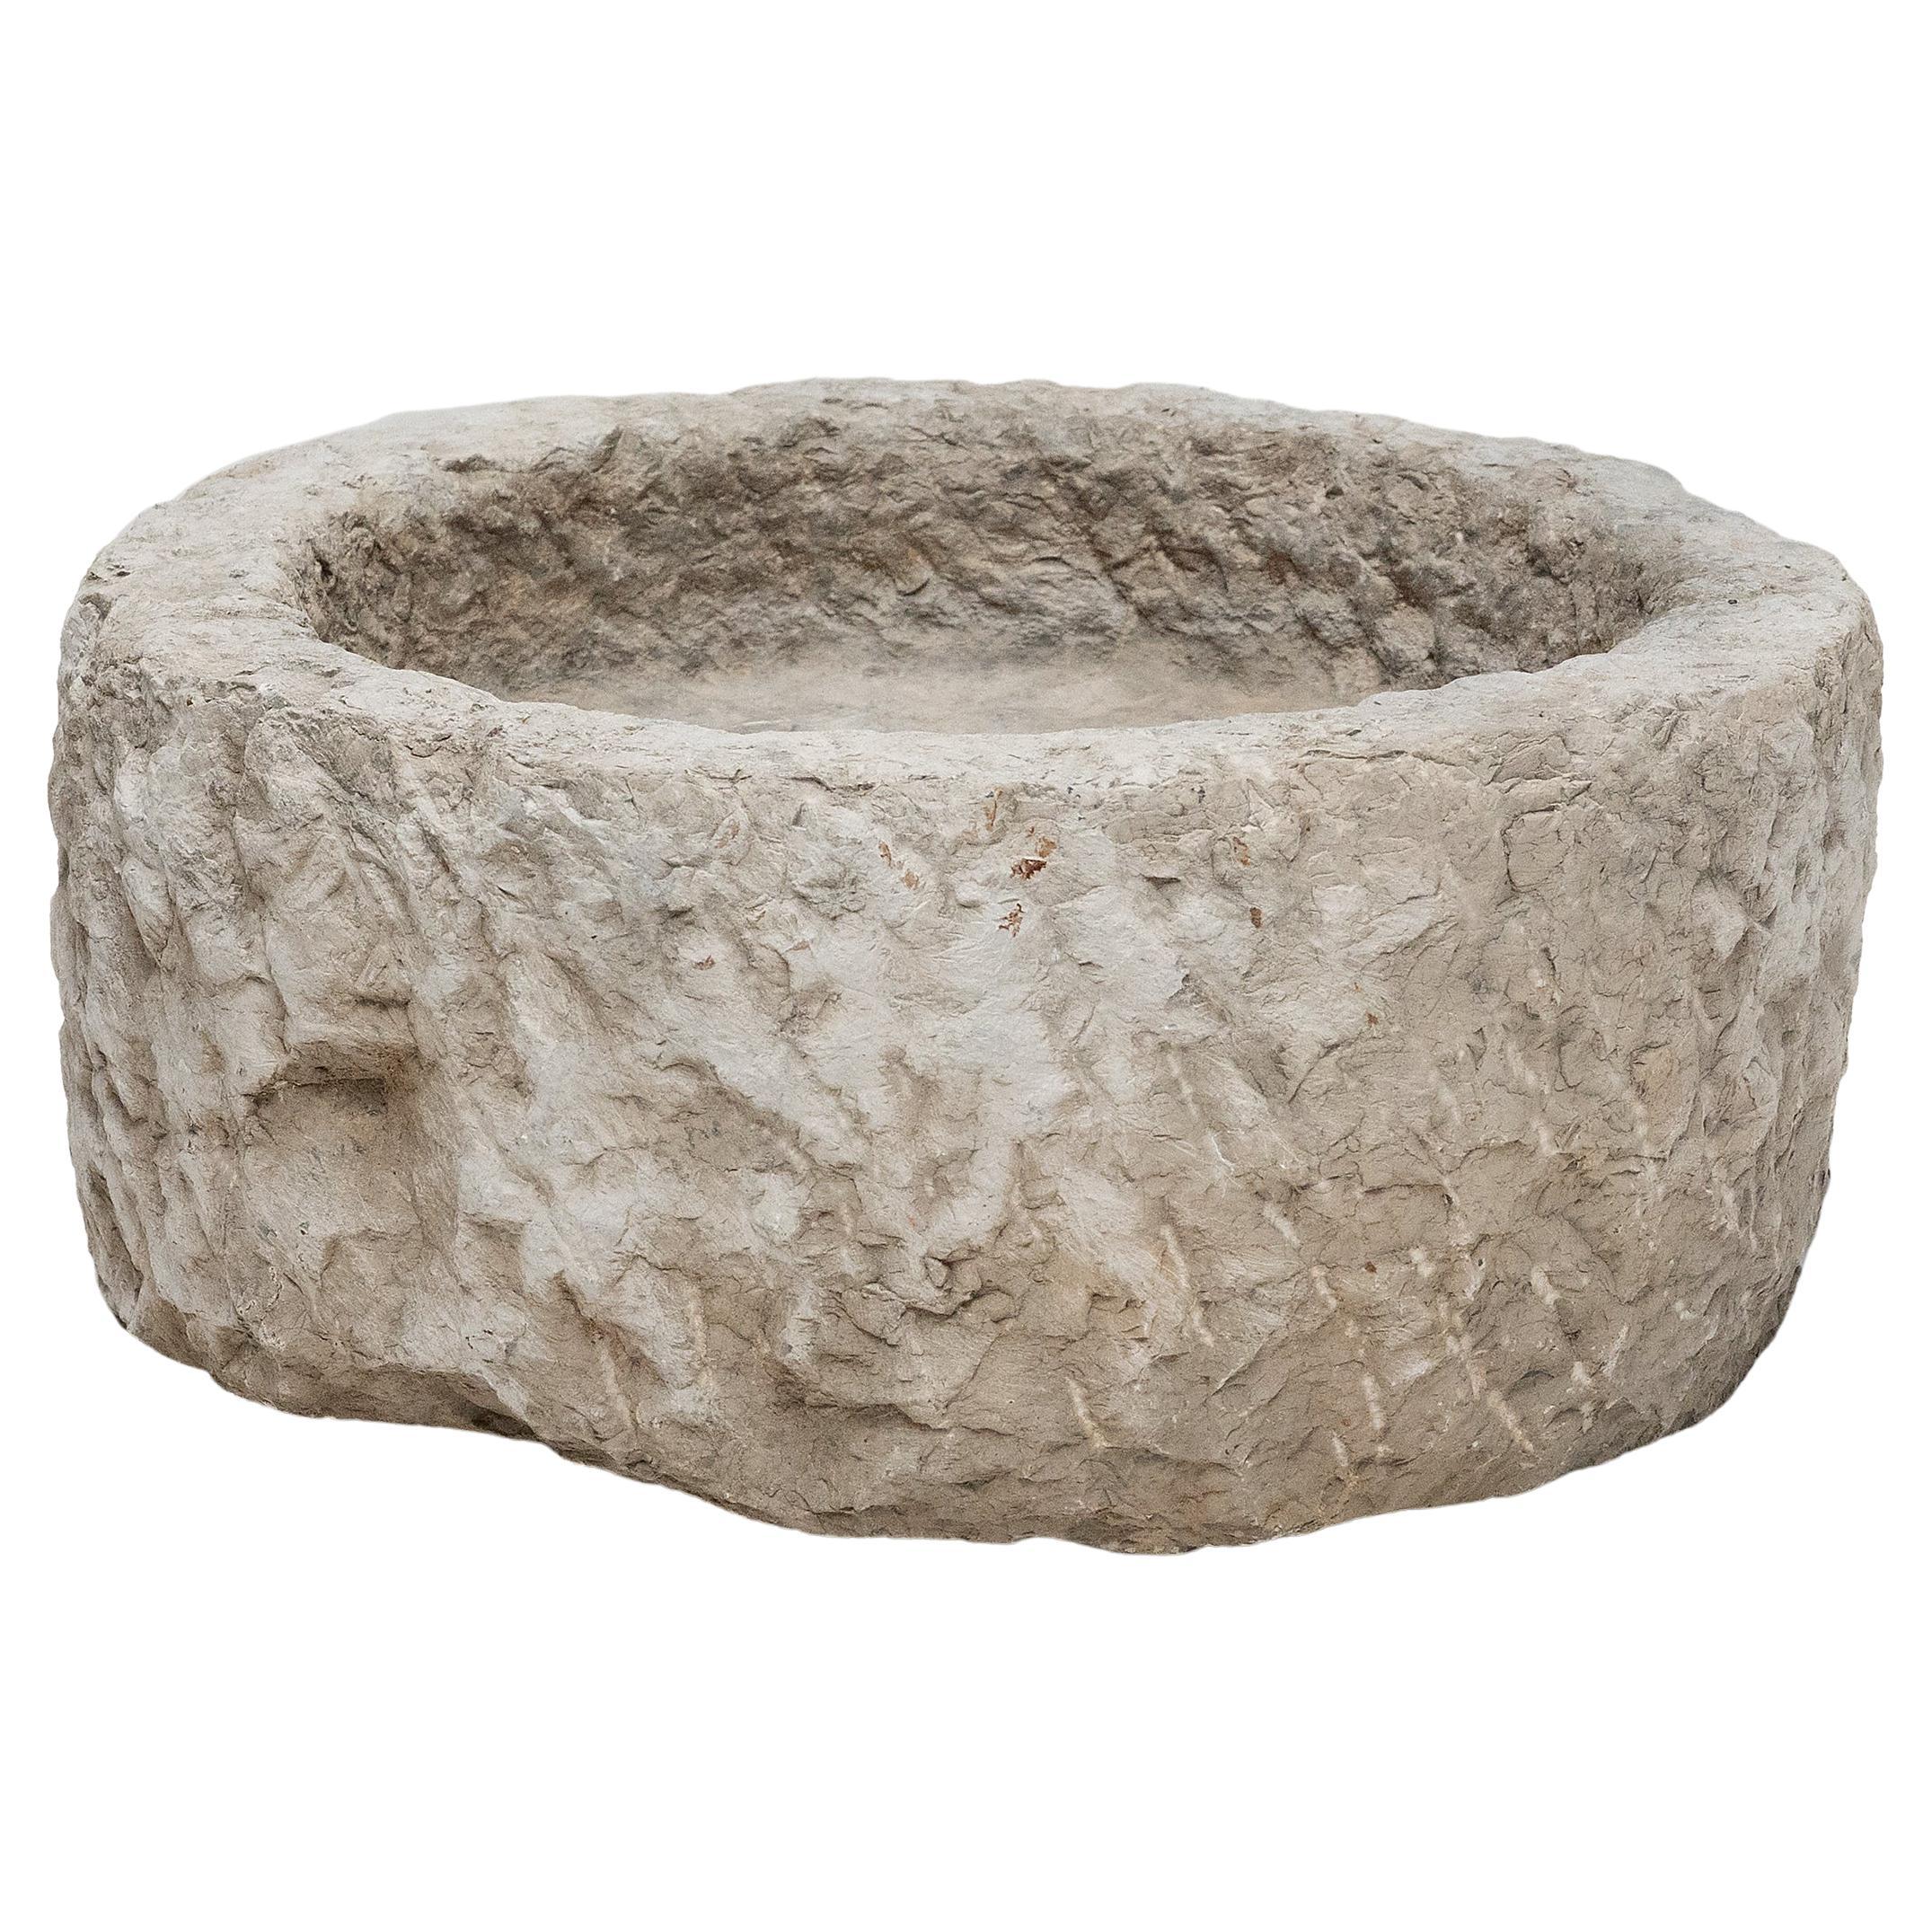 Full Moon Chinese Stone Trough, c. 1800 at 1stDibs